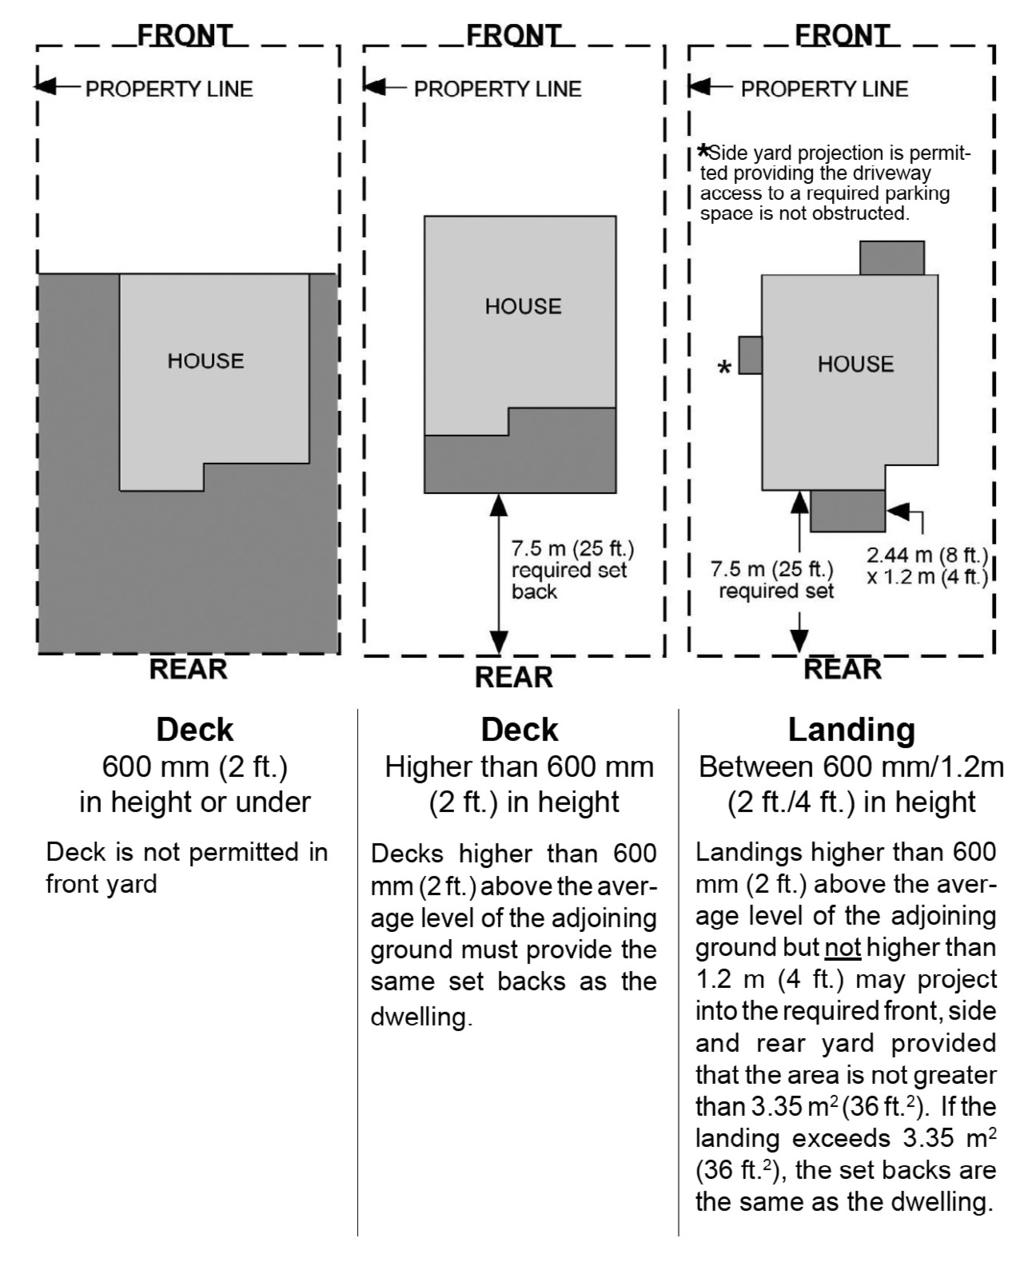 Where and how high can I build my deck? As indicated in FIGURE 4, zoning requirements on the height of the deck will determine its location.